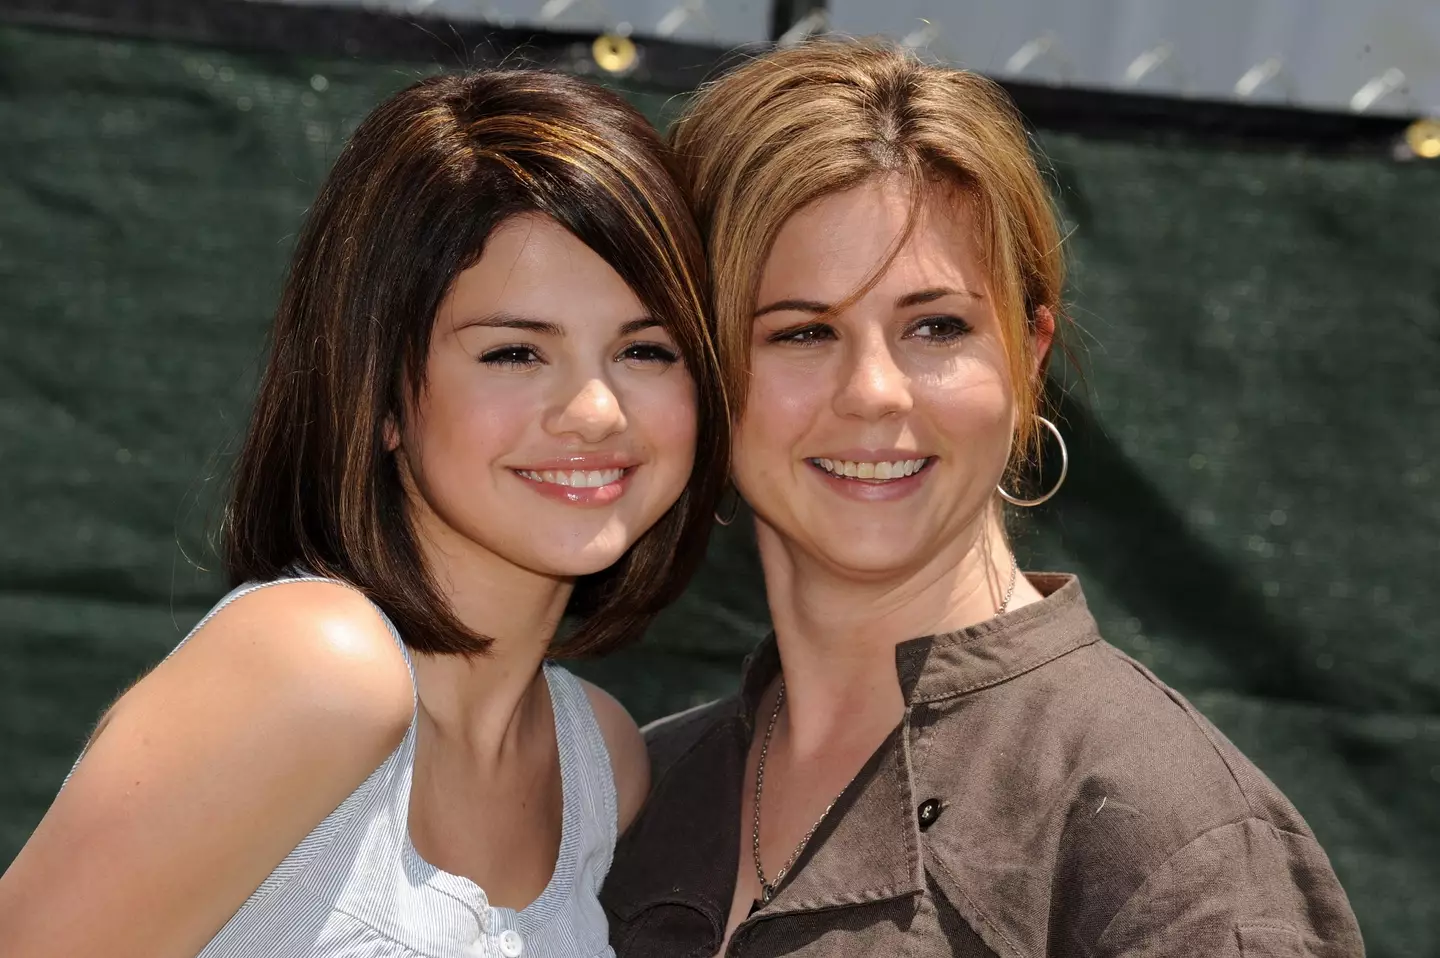 Selena Gomez's mum has spoken out about why she hasn't been able to bring herself to watch her daughter's documentary yet.